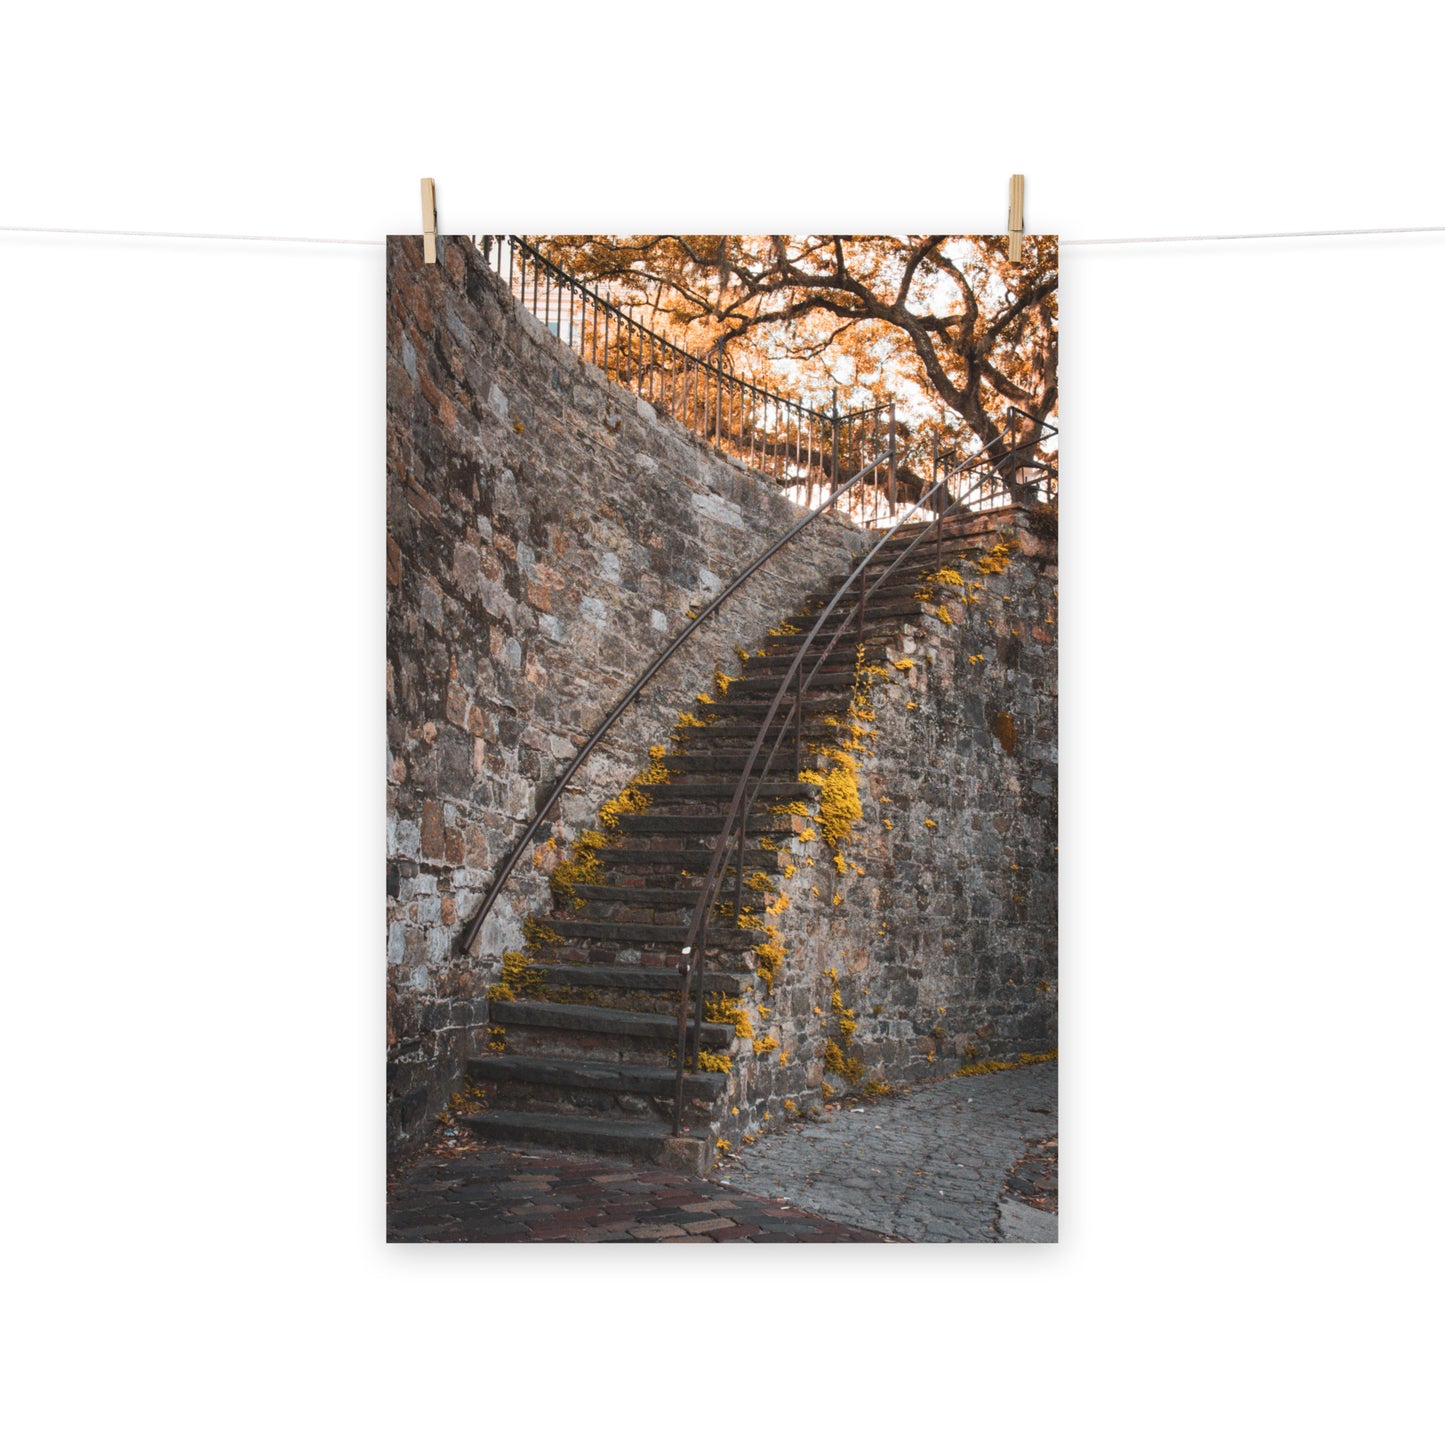 Architectural / Industrial / Cityscape Abstract Decor Old Stone Stairs River Street Savannah Ga Loose Wall Art Print 8" x 10"